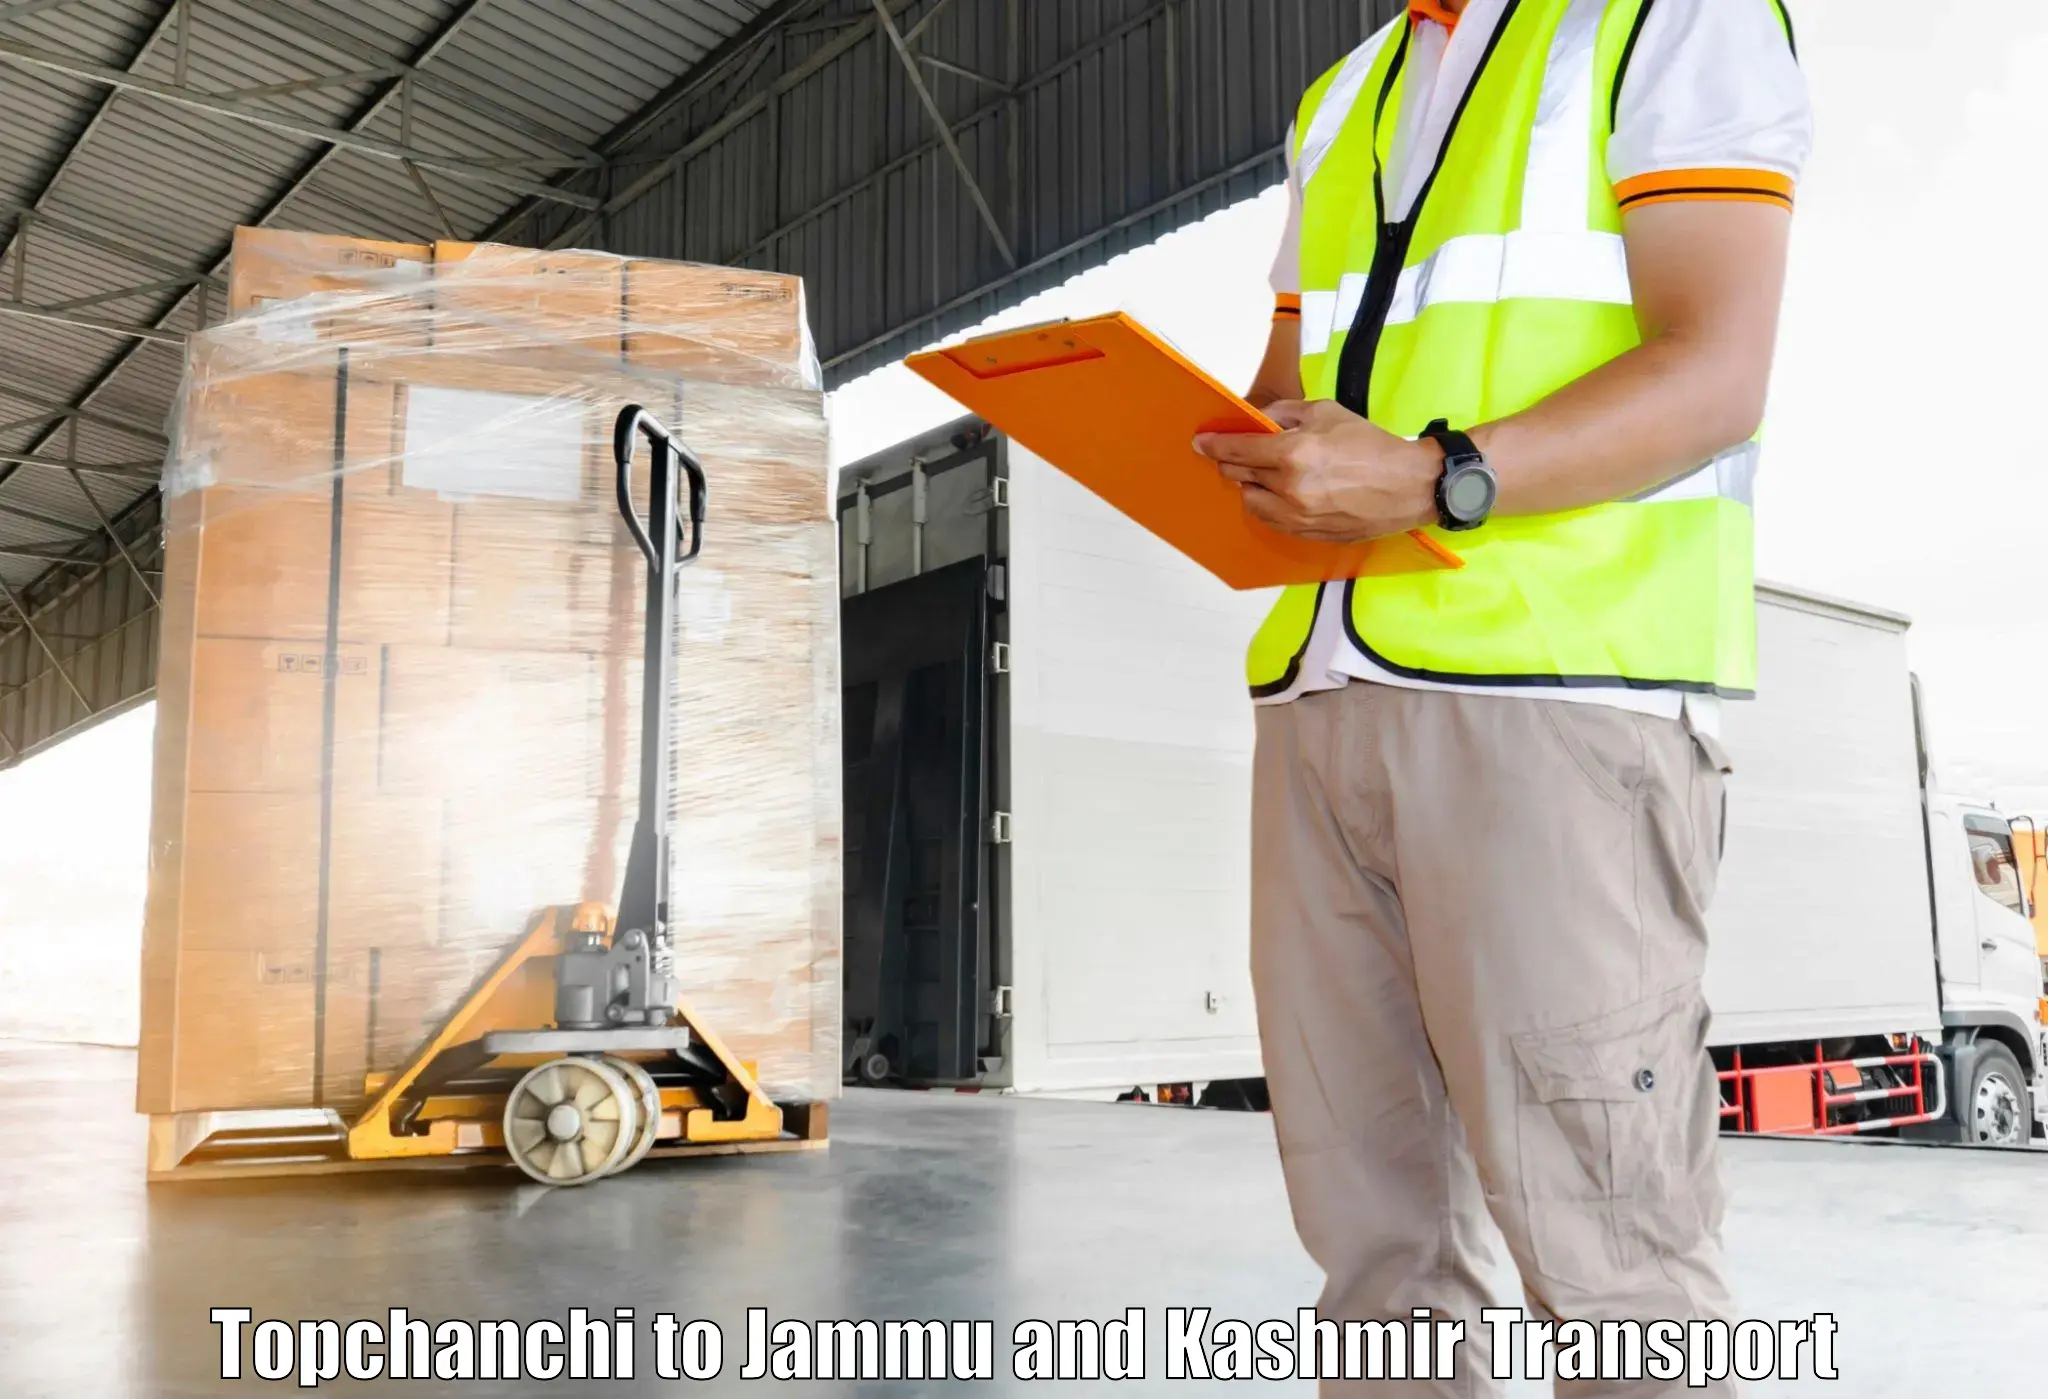 Commercial transport service Topchanchi to Jammu and Kashmir